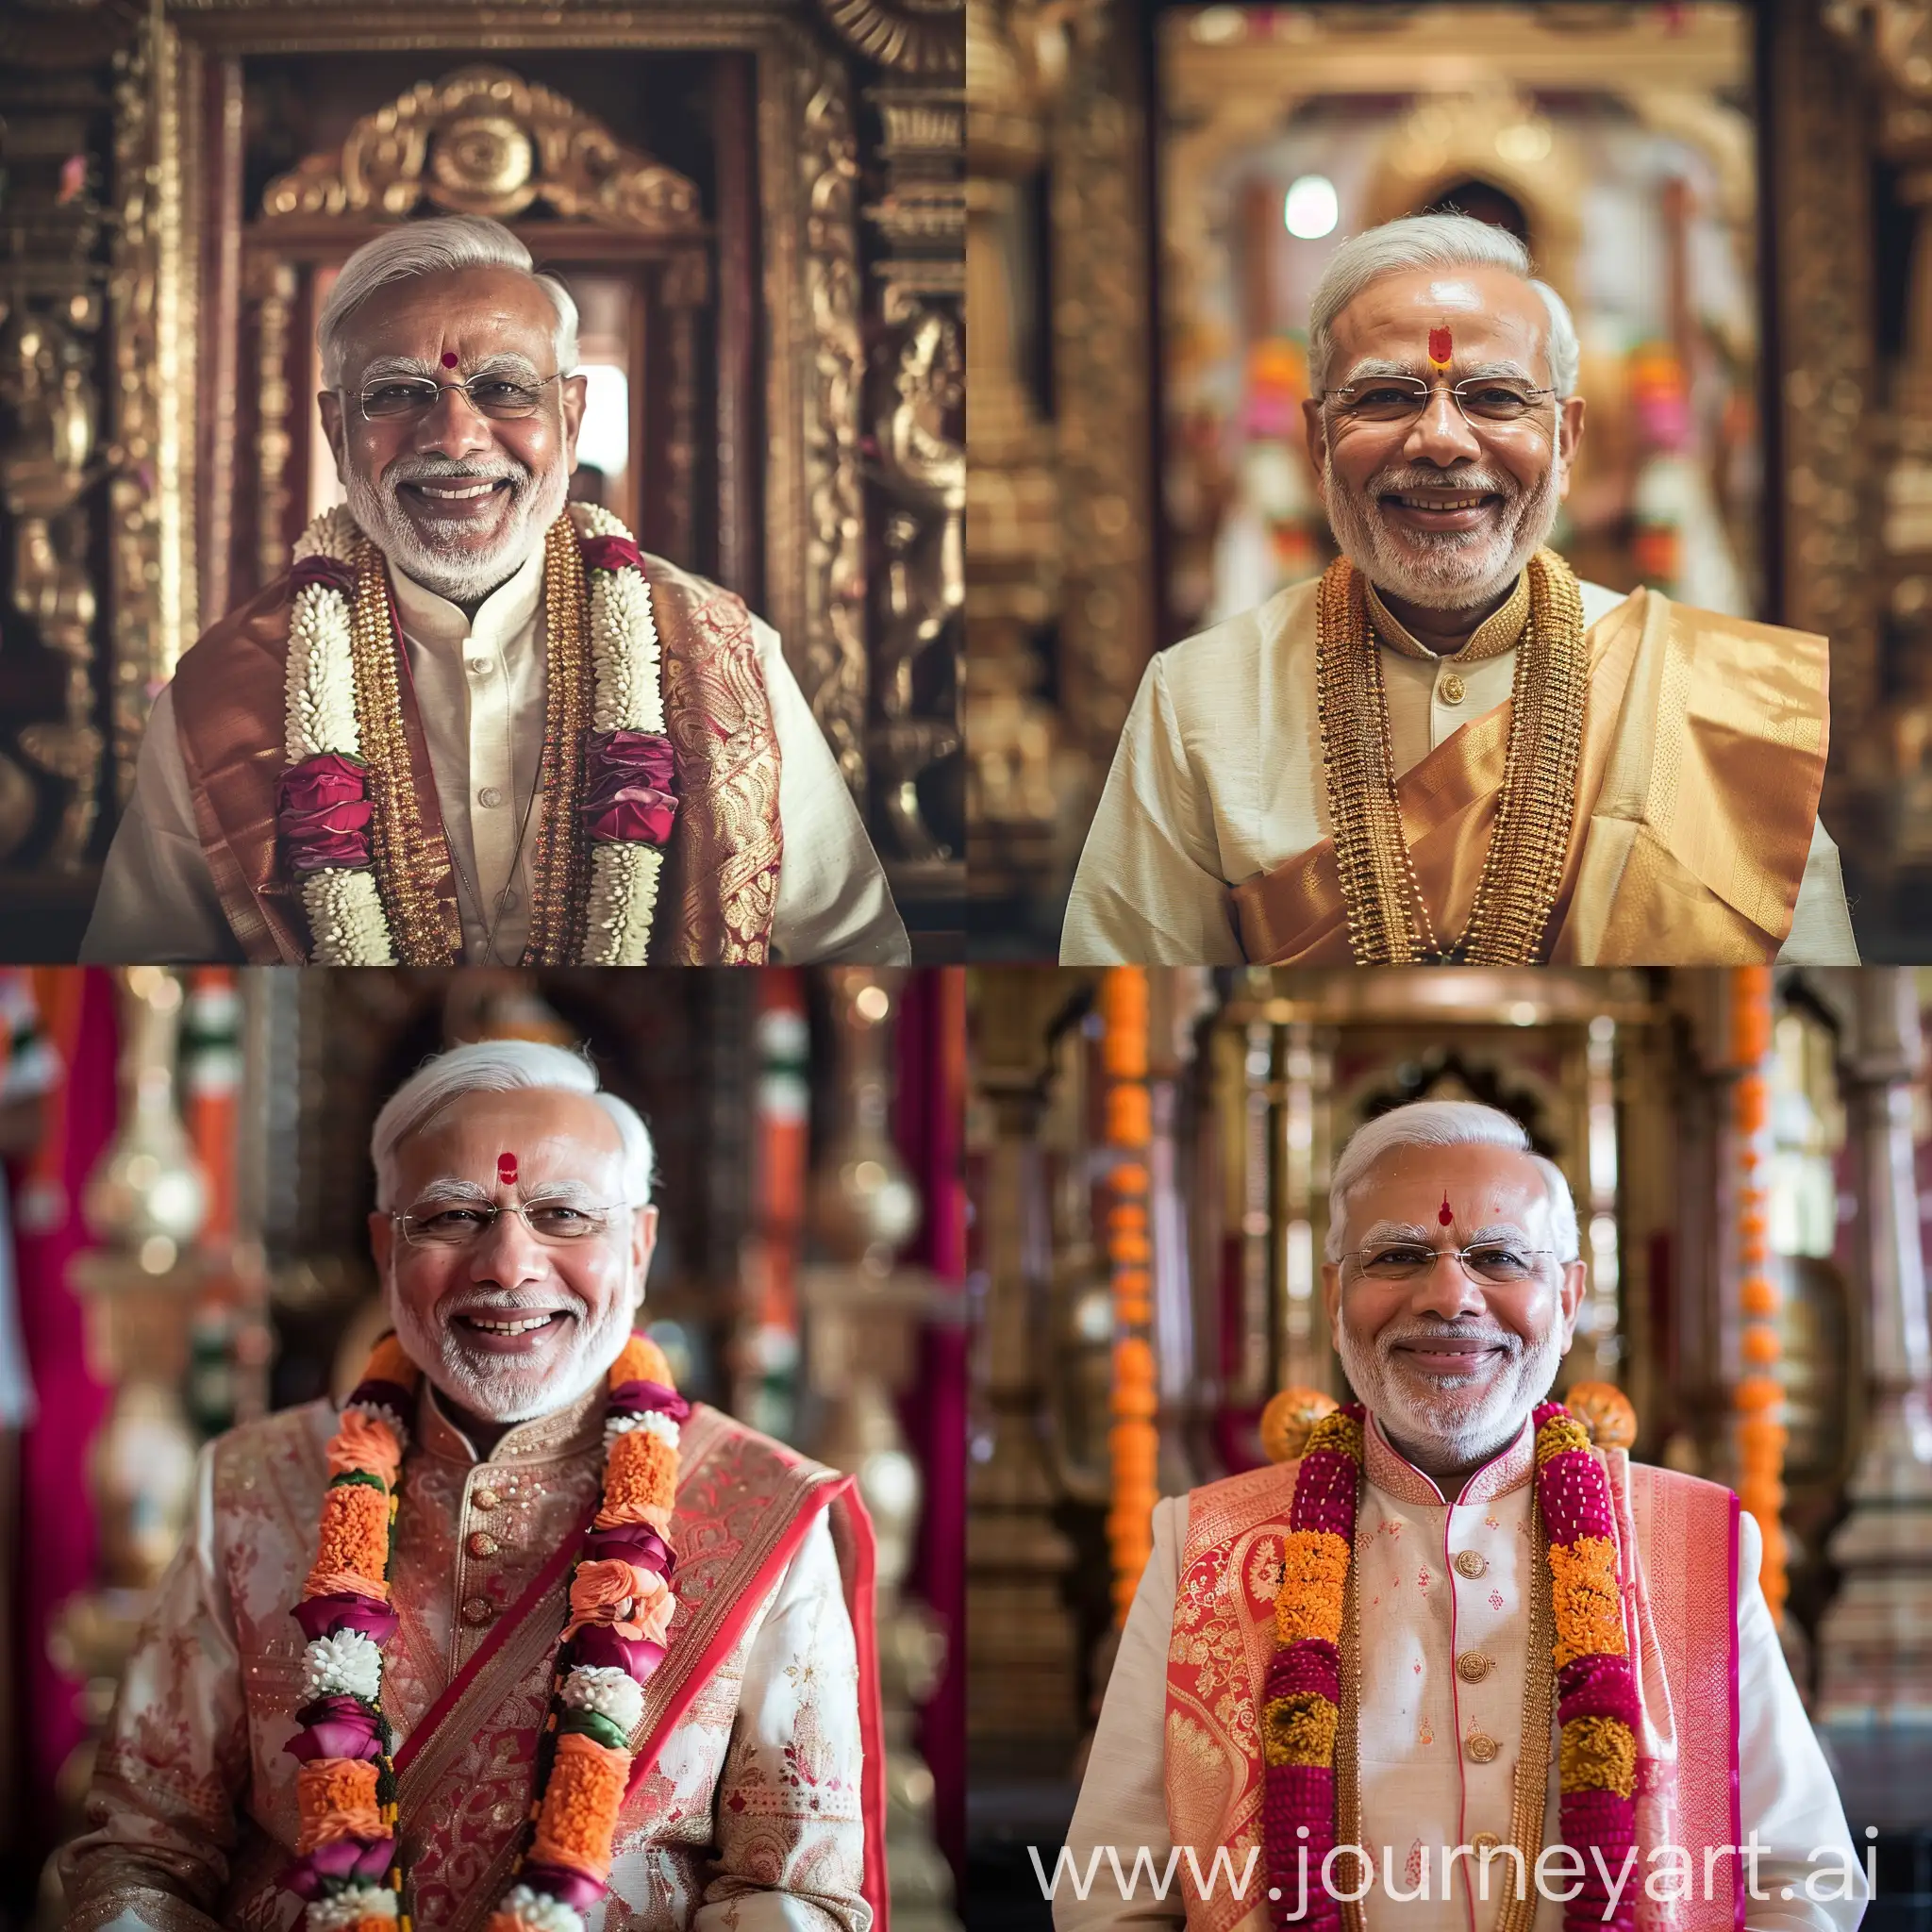 Generate an image of Narendra Modi smiling in and traditional Hindu attire. He must be in a temple